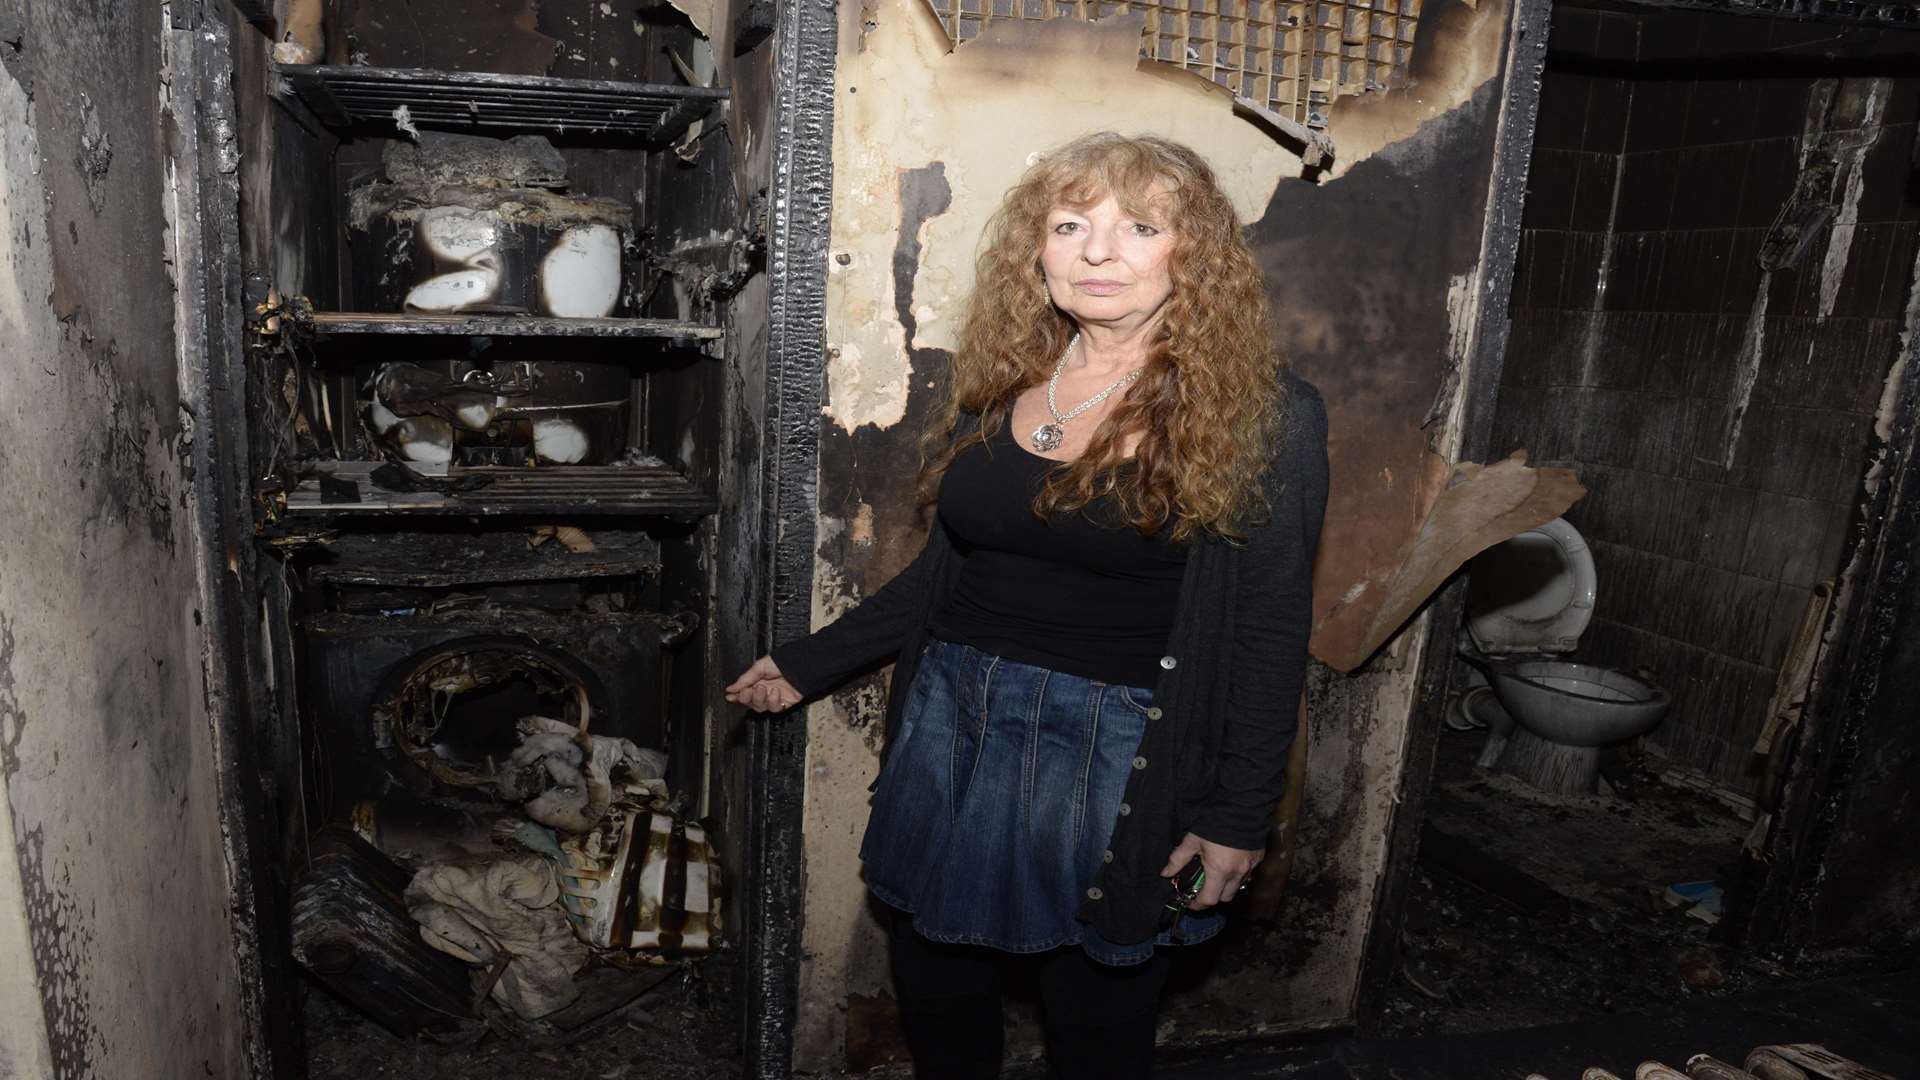 Veronica Tinkler shows the damage caused by the fire